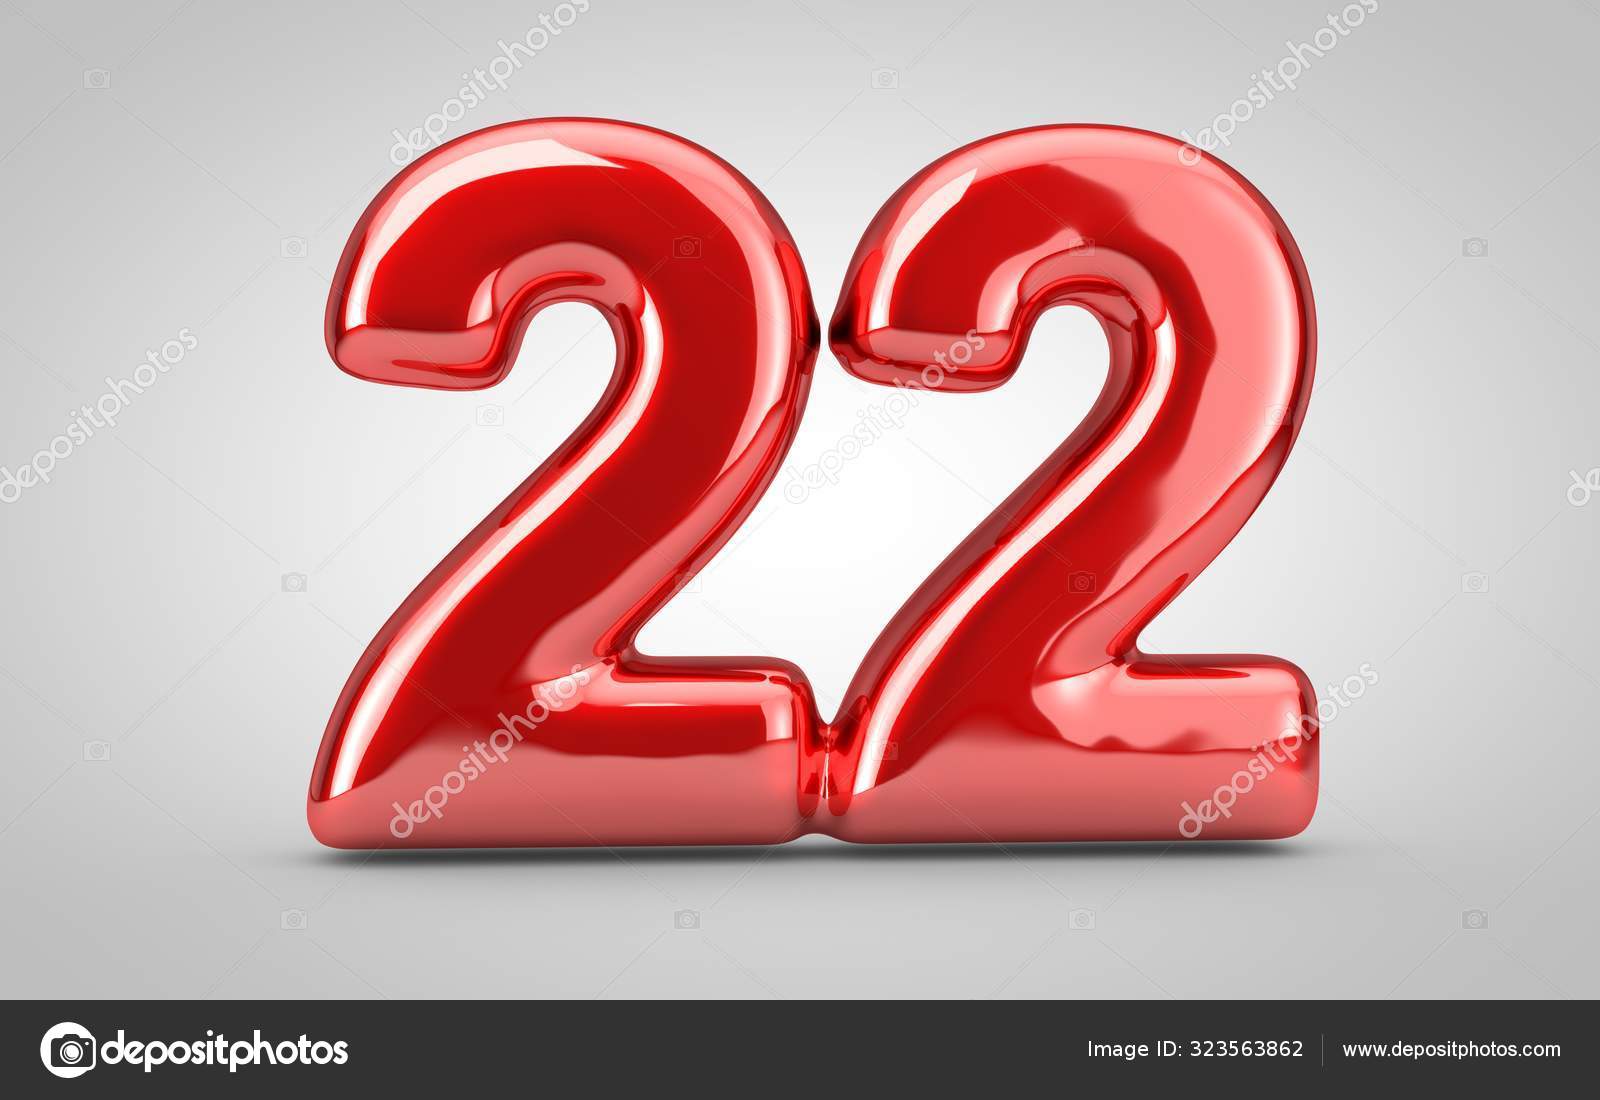 Red Glossy Balloon Number Isolated White Background Rendered Illustration  Best Stock Photo by ©whitebarbie 323563862